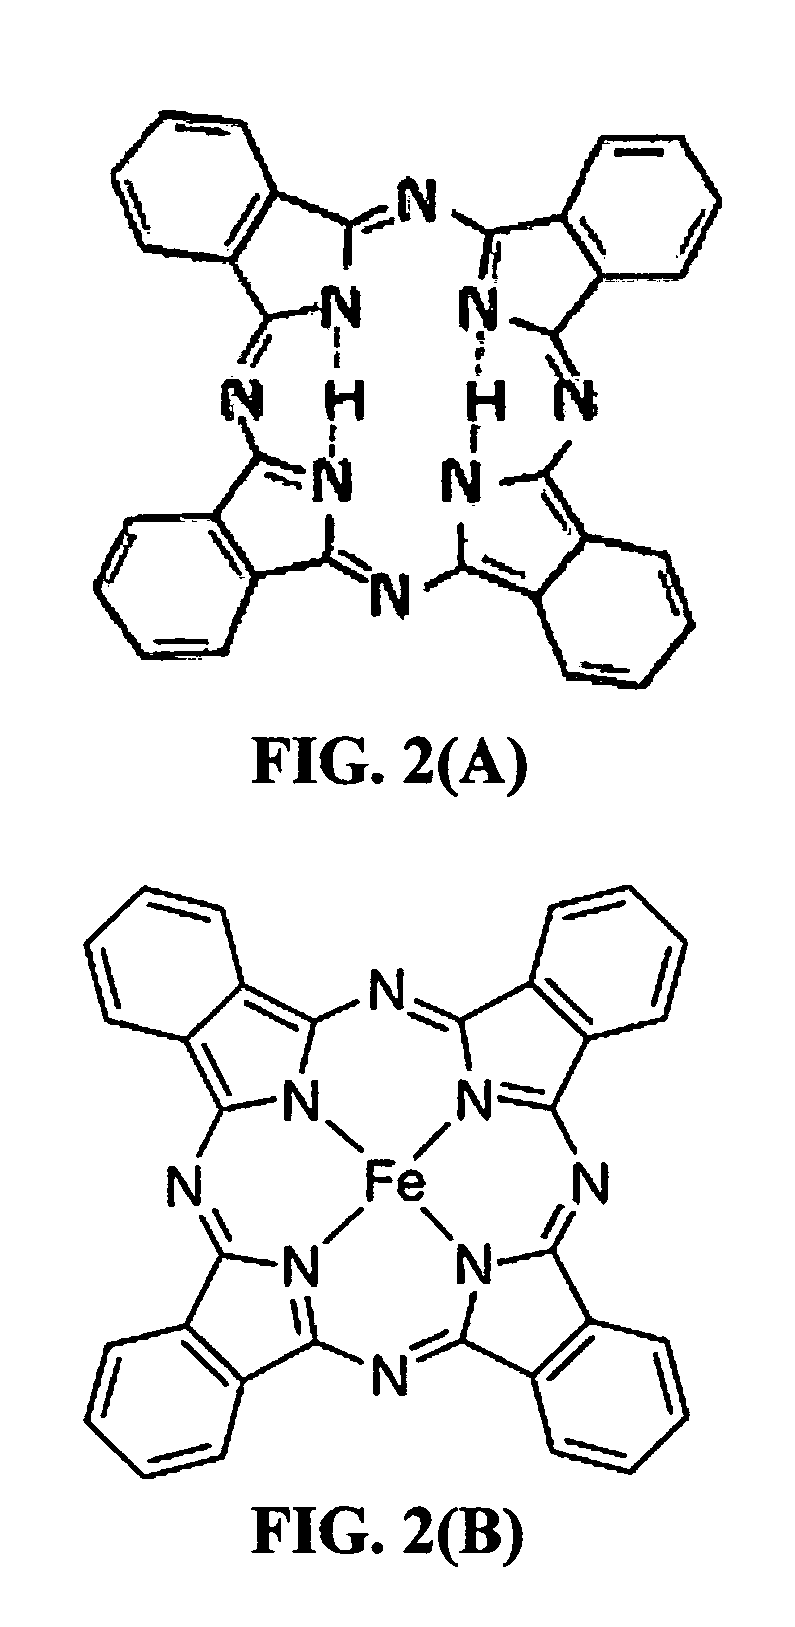 Rechargeable lithium cell having a phthalocyanine-based high-capacity cathode